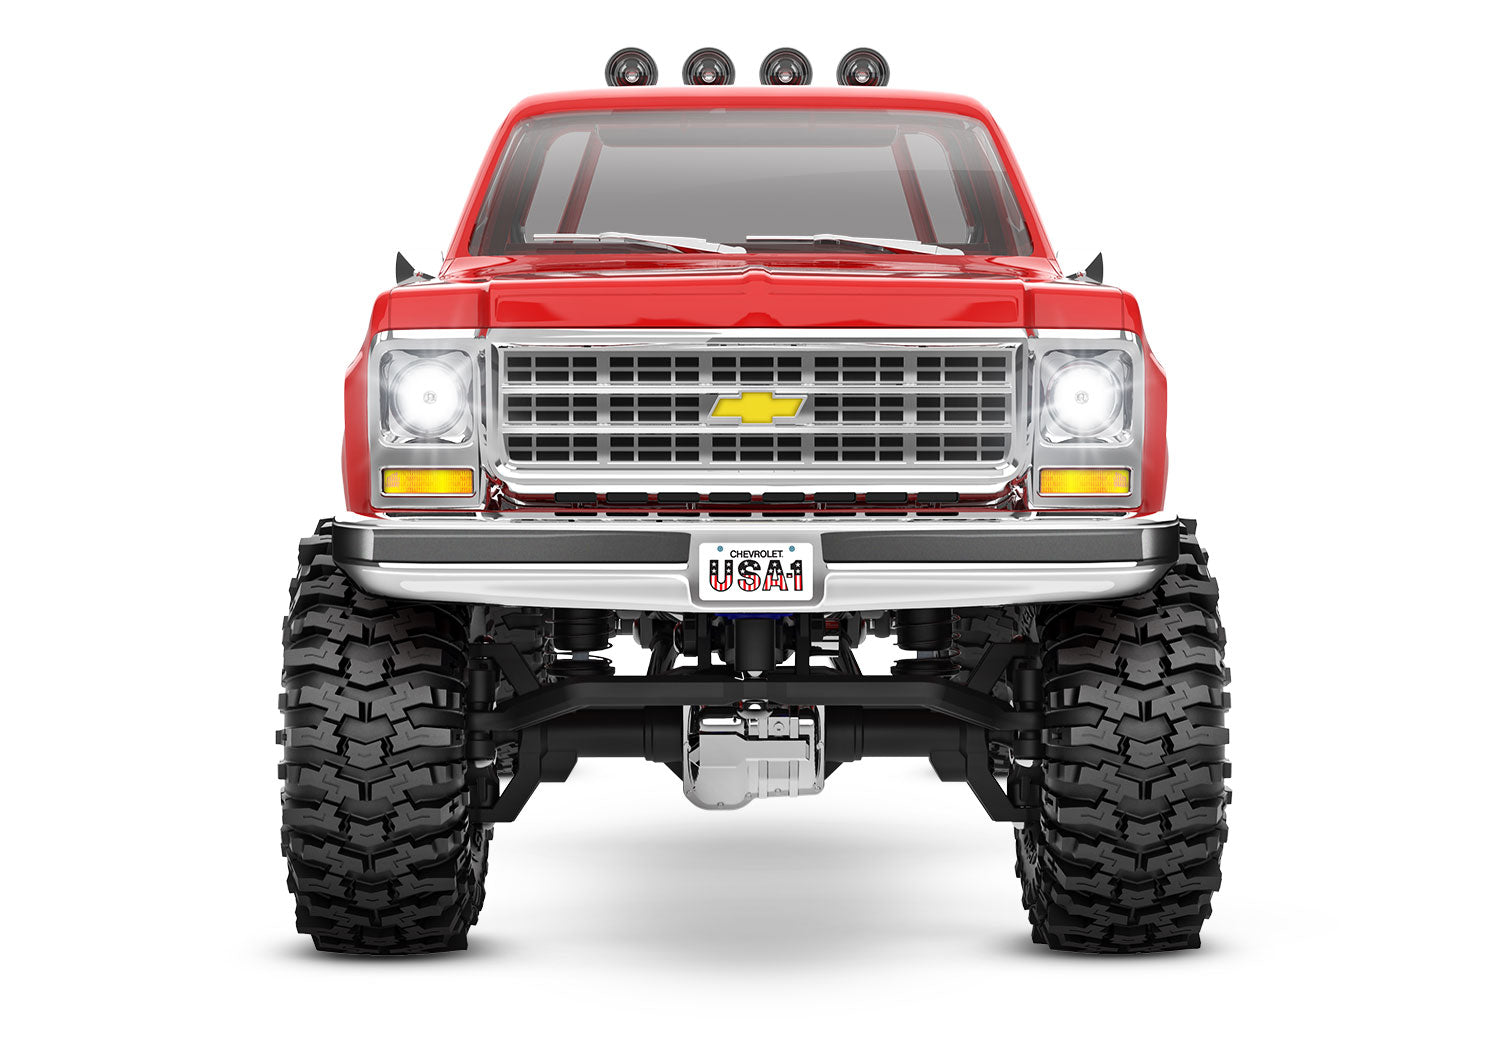 TRX-4M Chevrolet K10 High Trail Edition RED -- 97064-1-RED